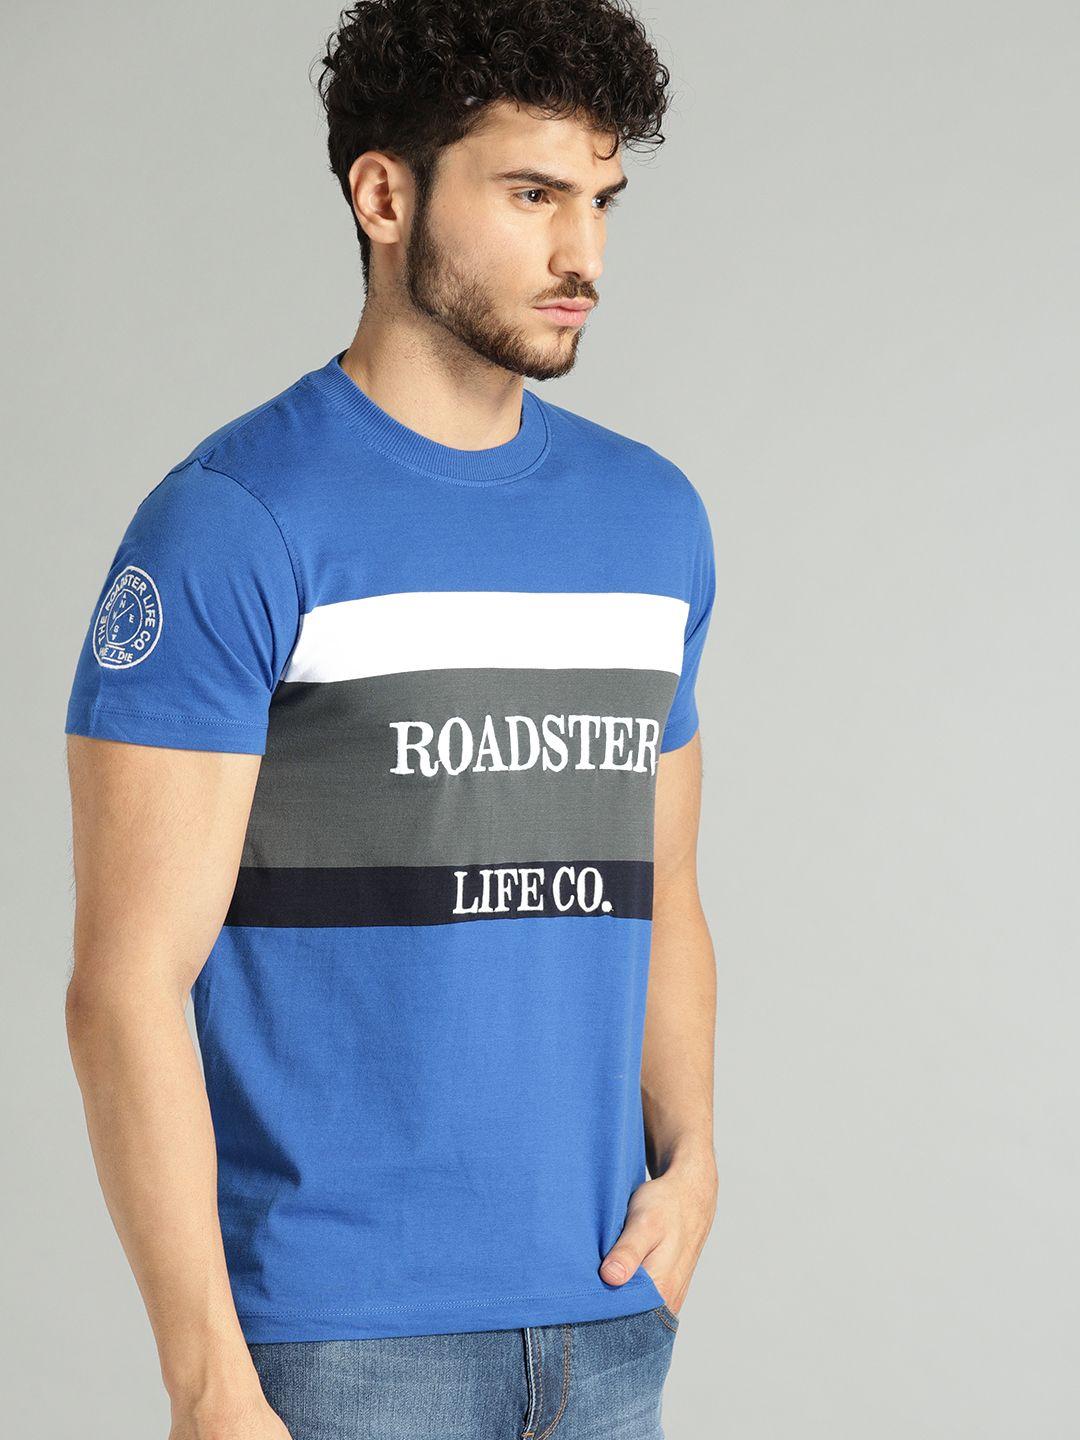 the roadster lifestyle co men blue printed round neck pure cotton t-shirt